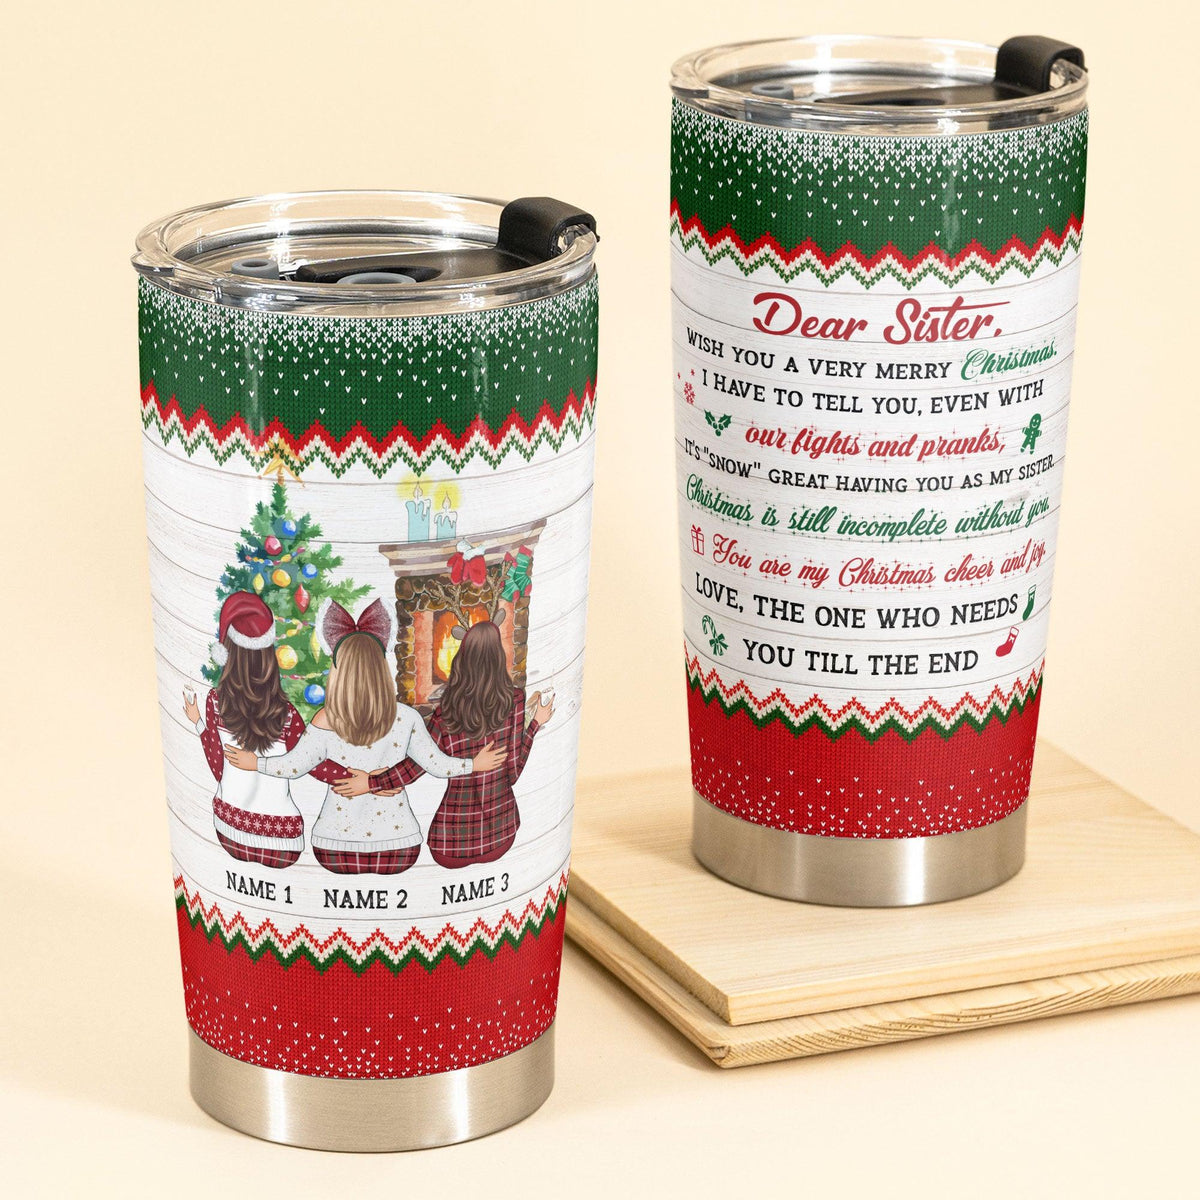 https://www.macorners.shop/wp-content/uploads/1689/77/snow-great-having-you-personalized-tumbler-cup-christmas-gift-for-sisters-macorner-is-offered-at-a-reasonable-price-with-exemplary-service-for-all-our-loyal-customers_0.jpg